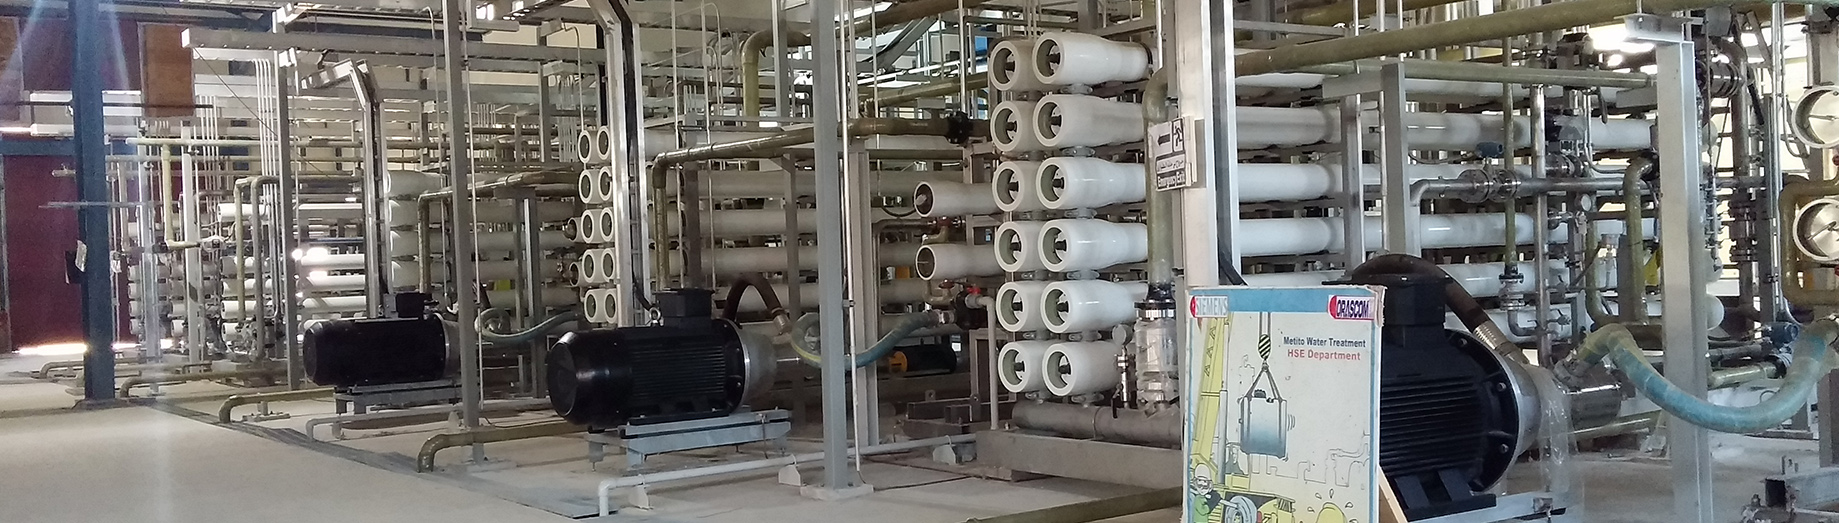 Burullus Combined Cycle Power Plant Water/WWTP